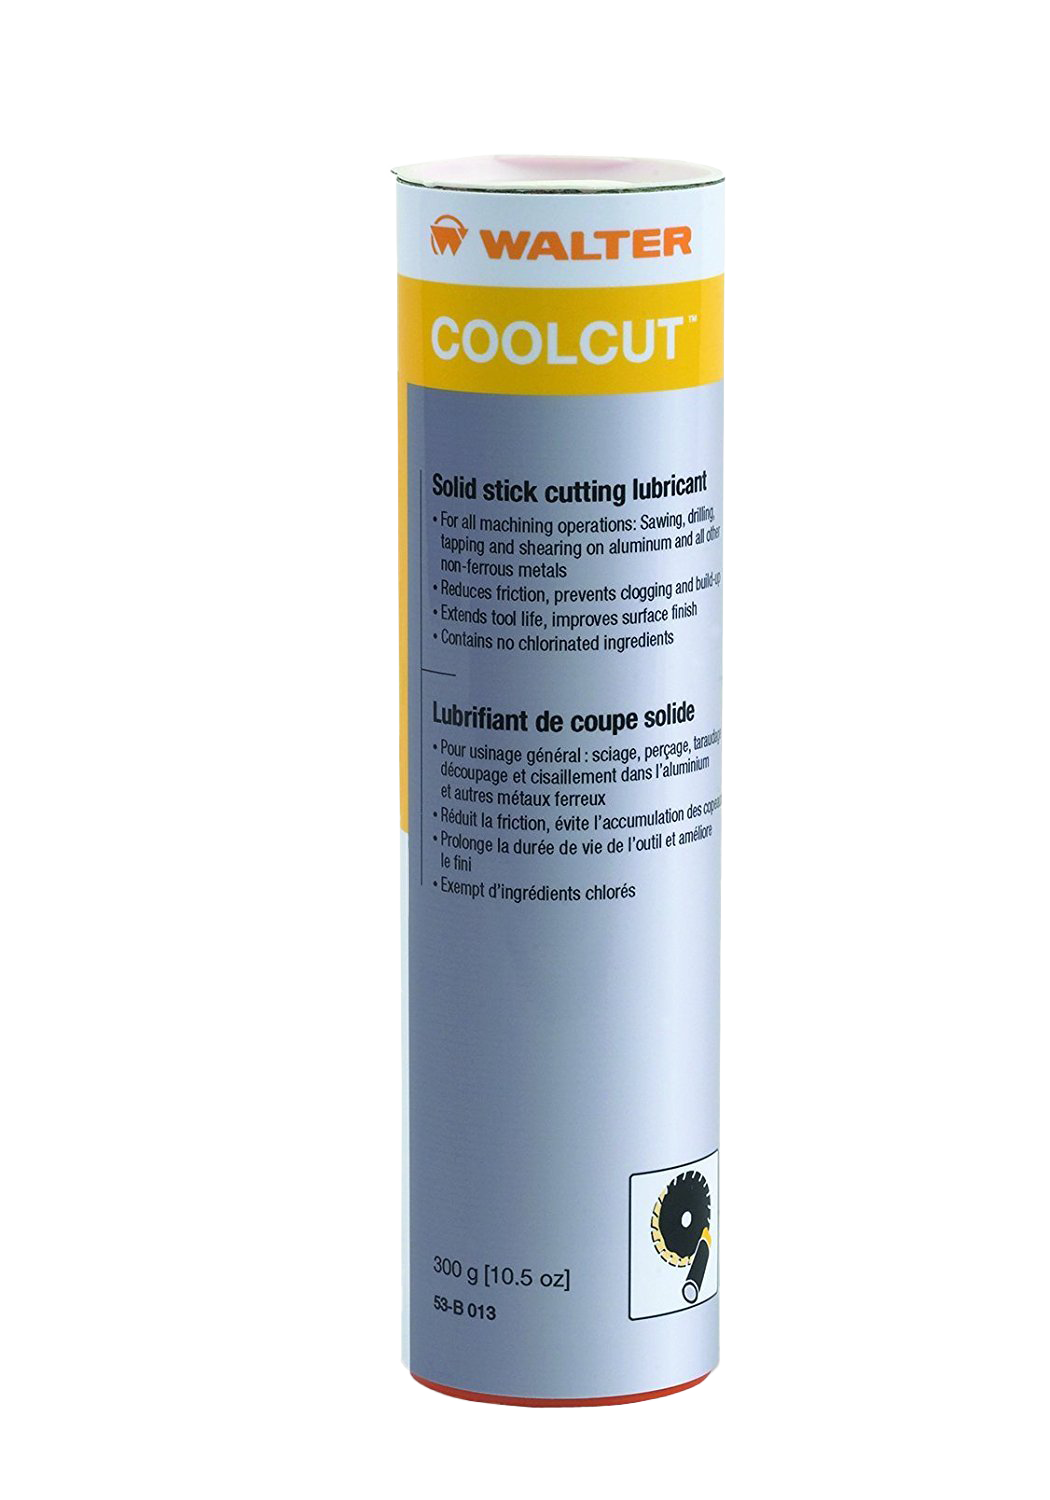 Walter COOLCUT™ Solid Stick Metal Cutting Lubricant (300g)